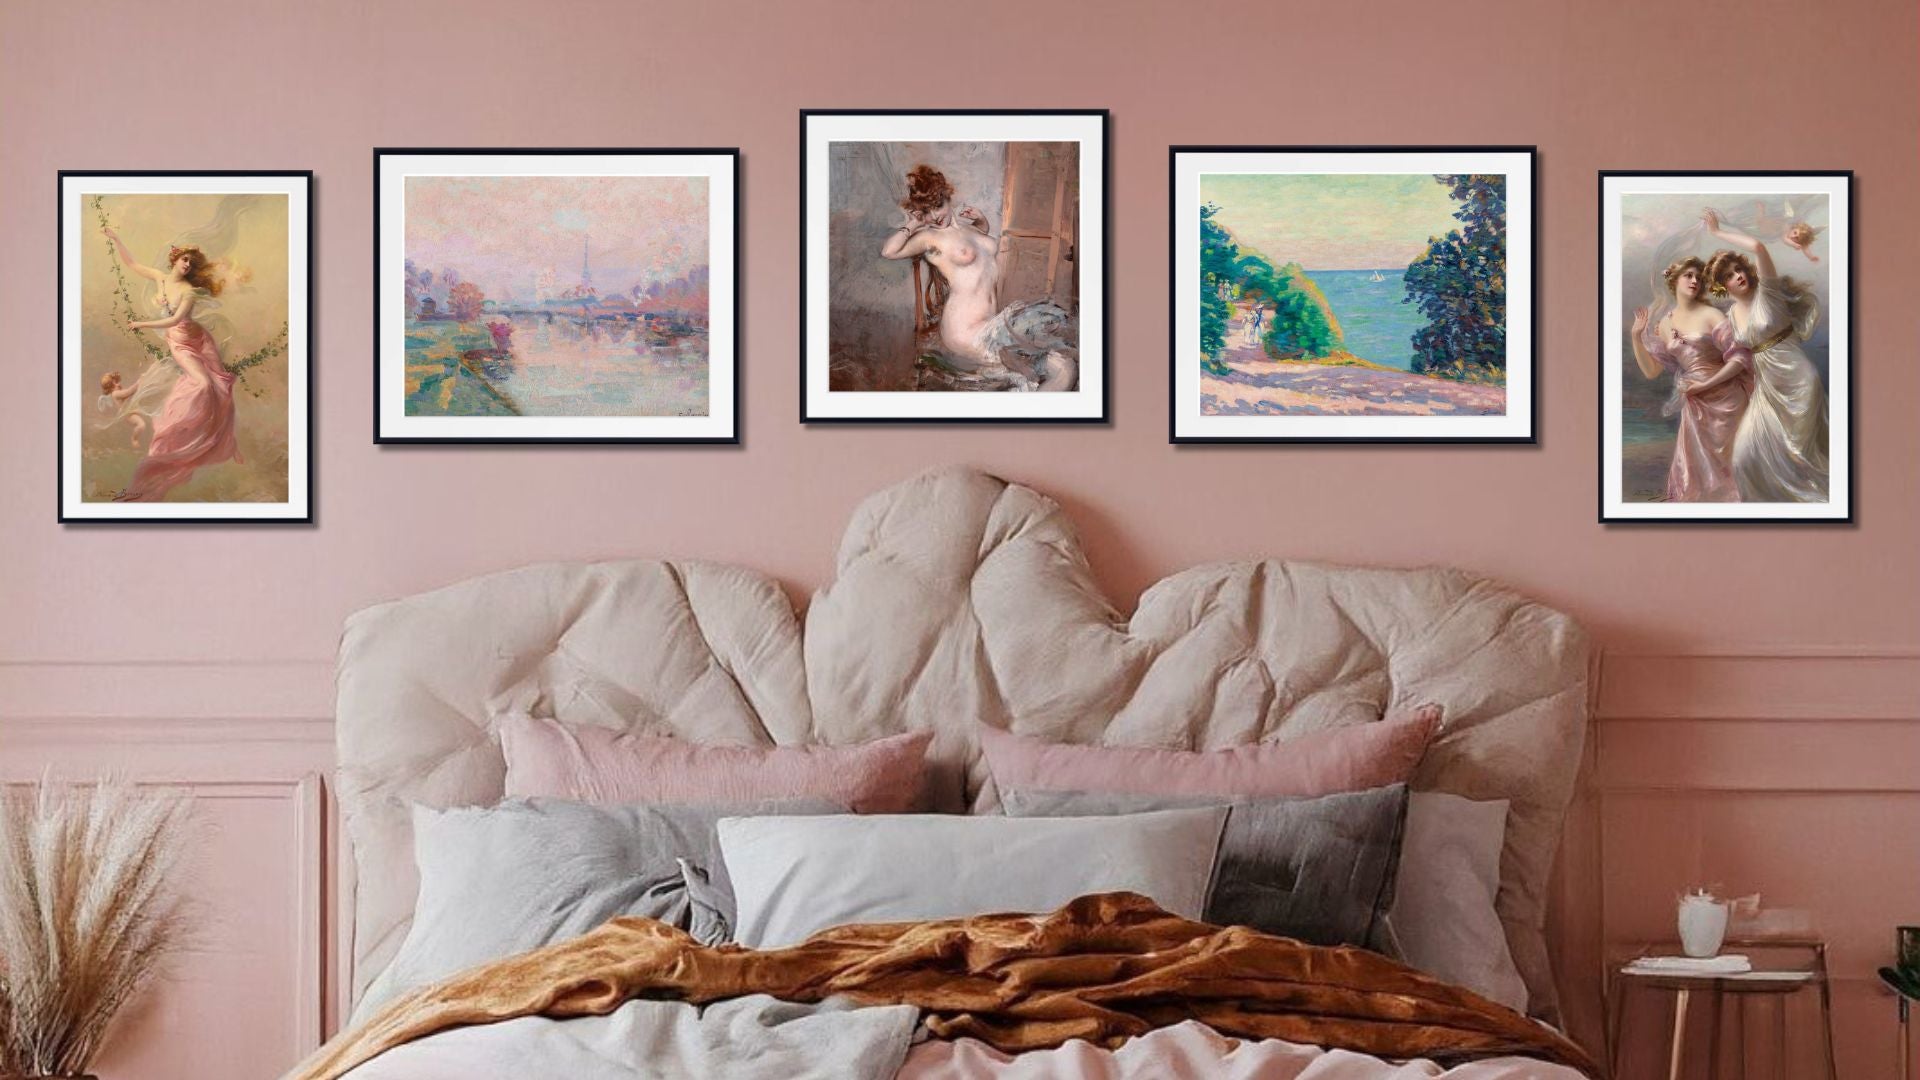 Adding a Pop of Color with Pink Bedroom Wall Art